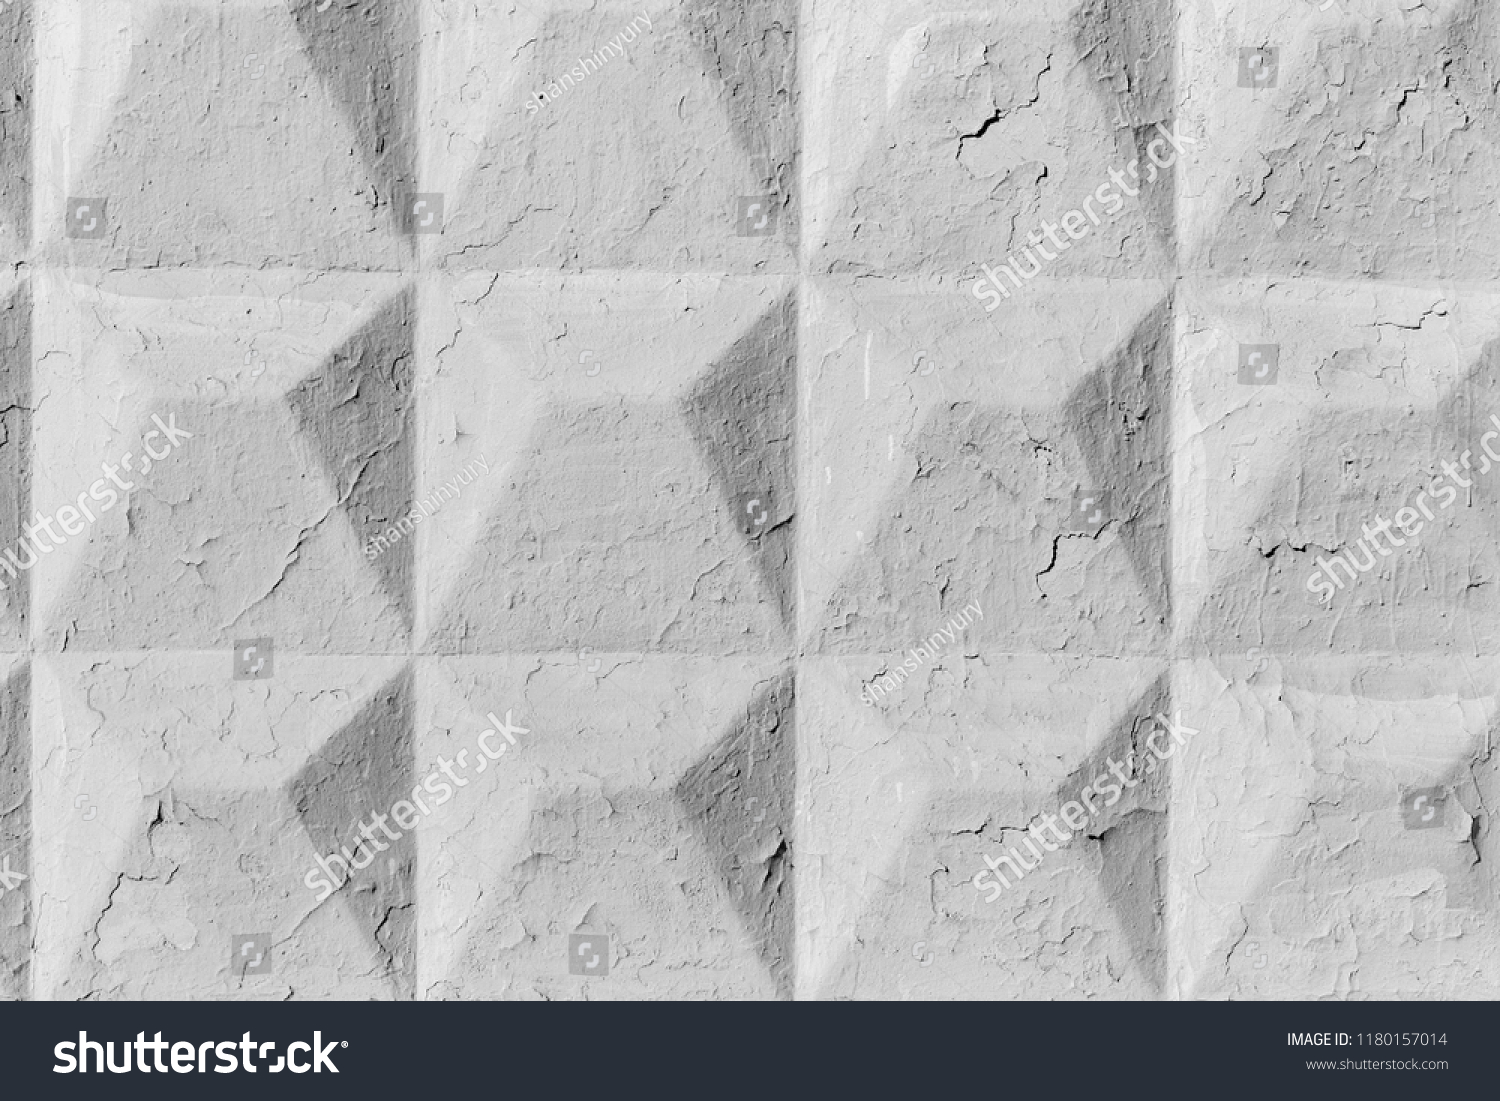 Concrete cracked wall with rhombuses pattern background #1180157014